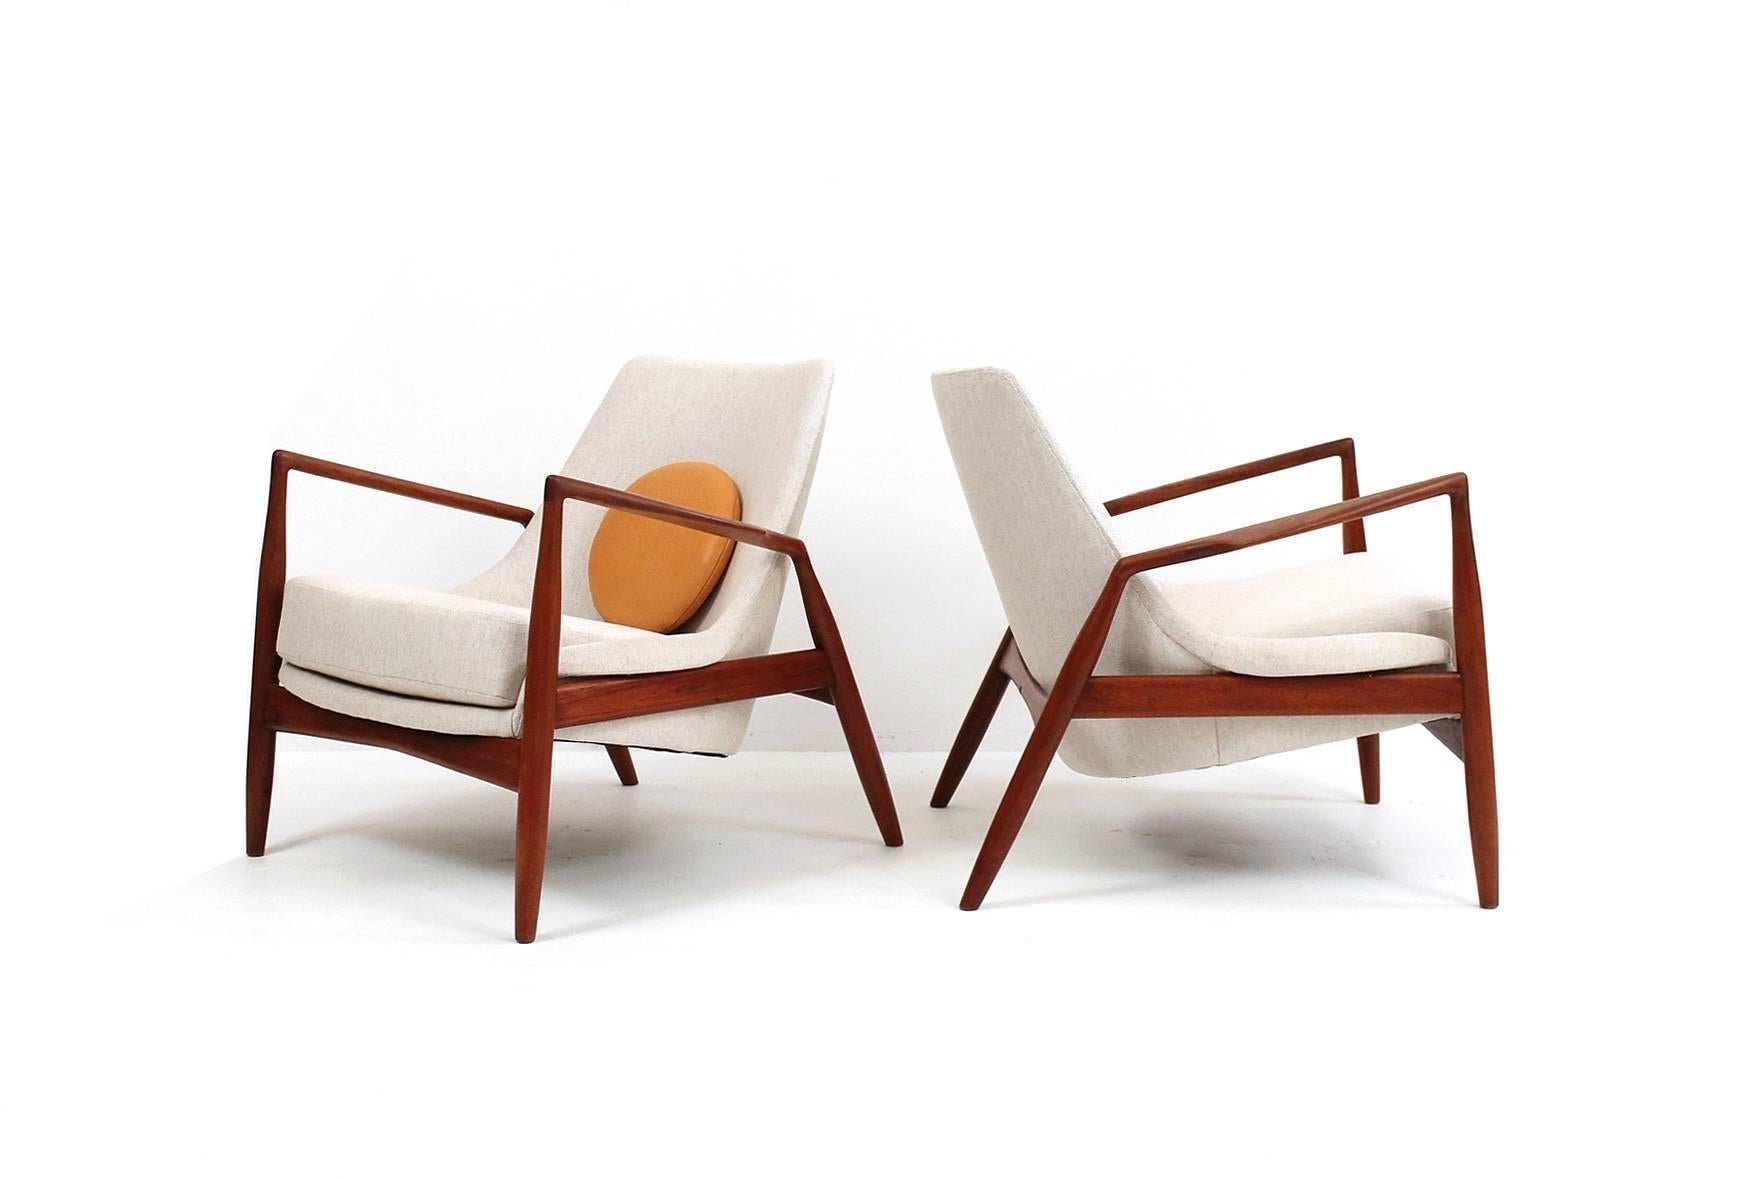 Sculptural pair of teak “Seal” lounge chair designed by Ib Kofod Larsen for Swedish firm OPE Mobler. Recently re-upholstered. Accented with circular leather pillows. Outstanding lounge seating.